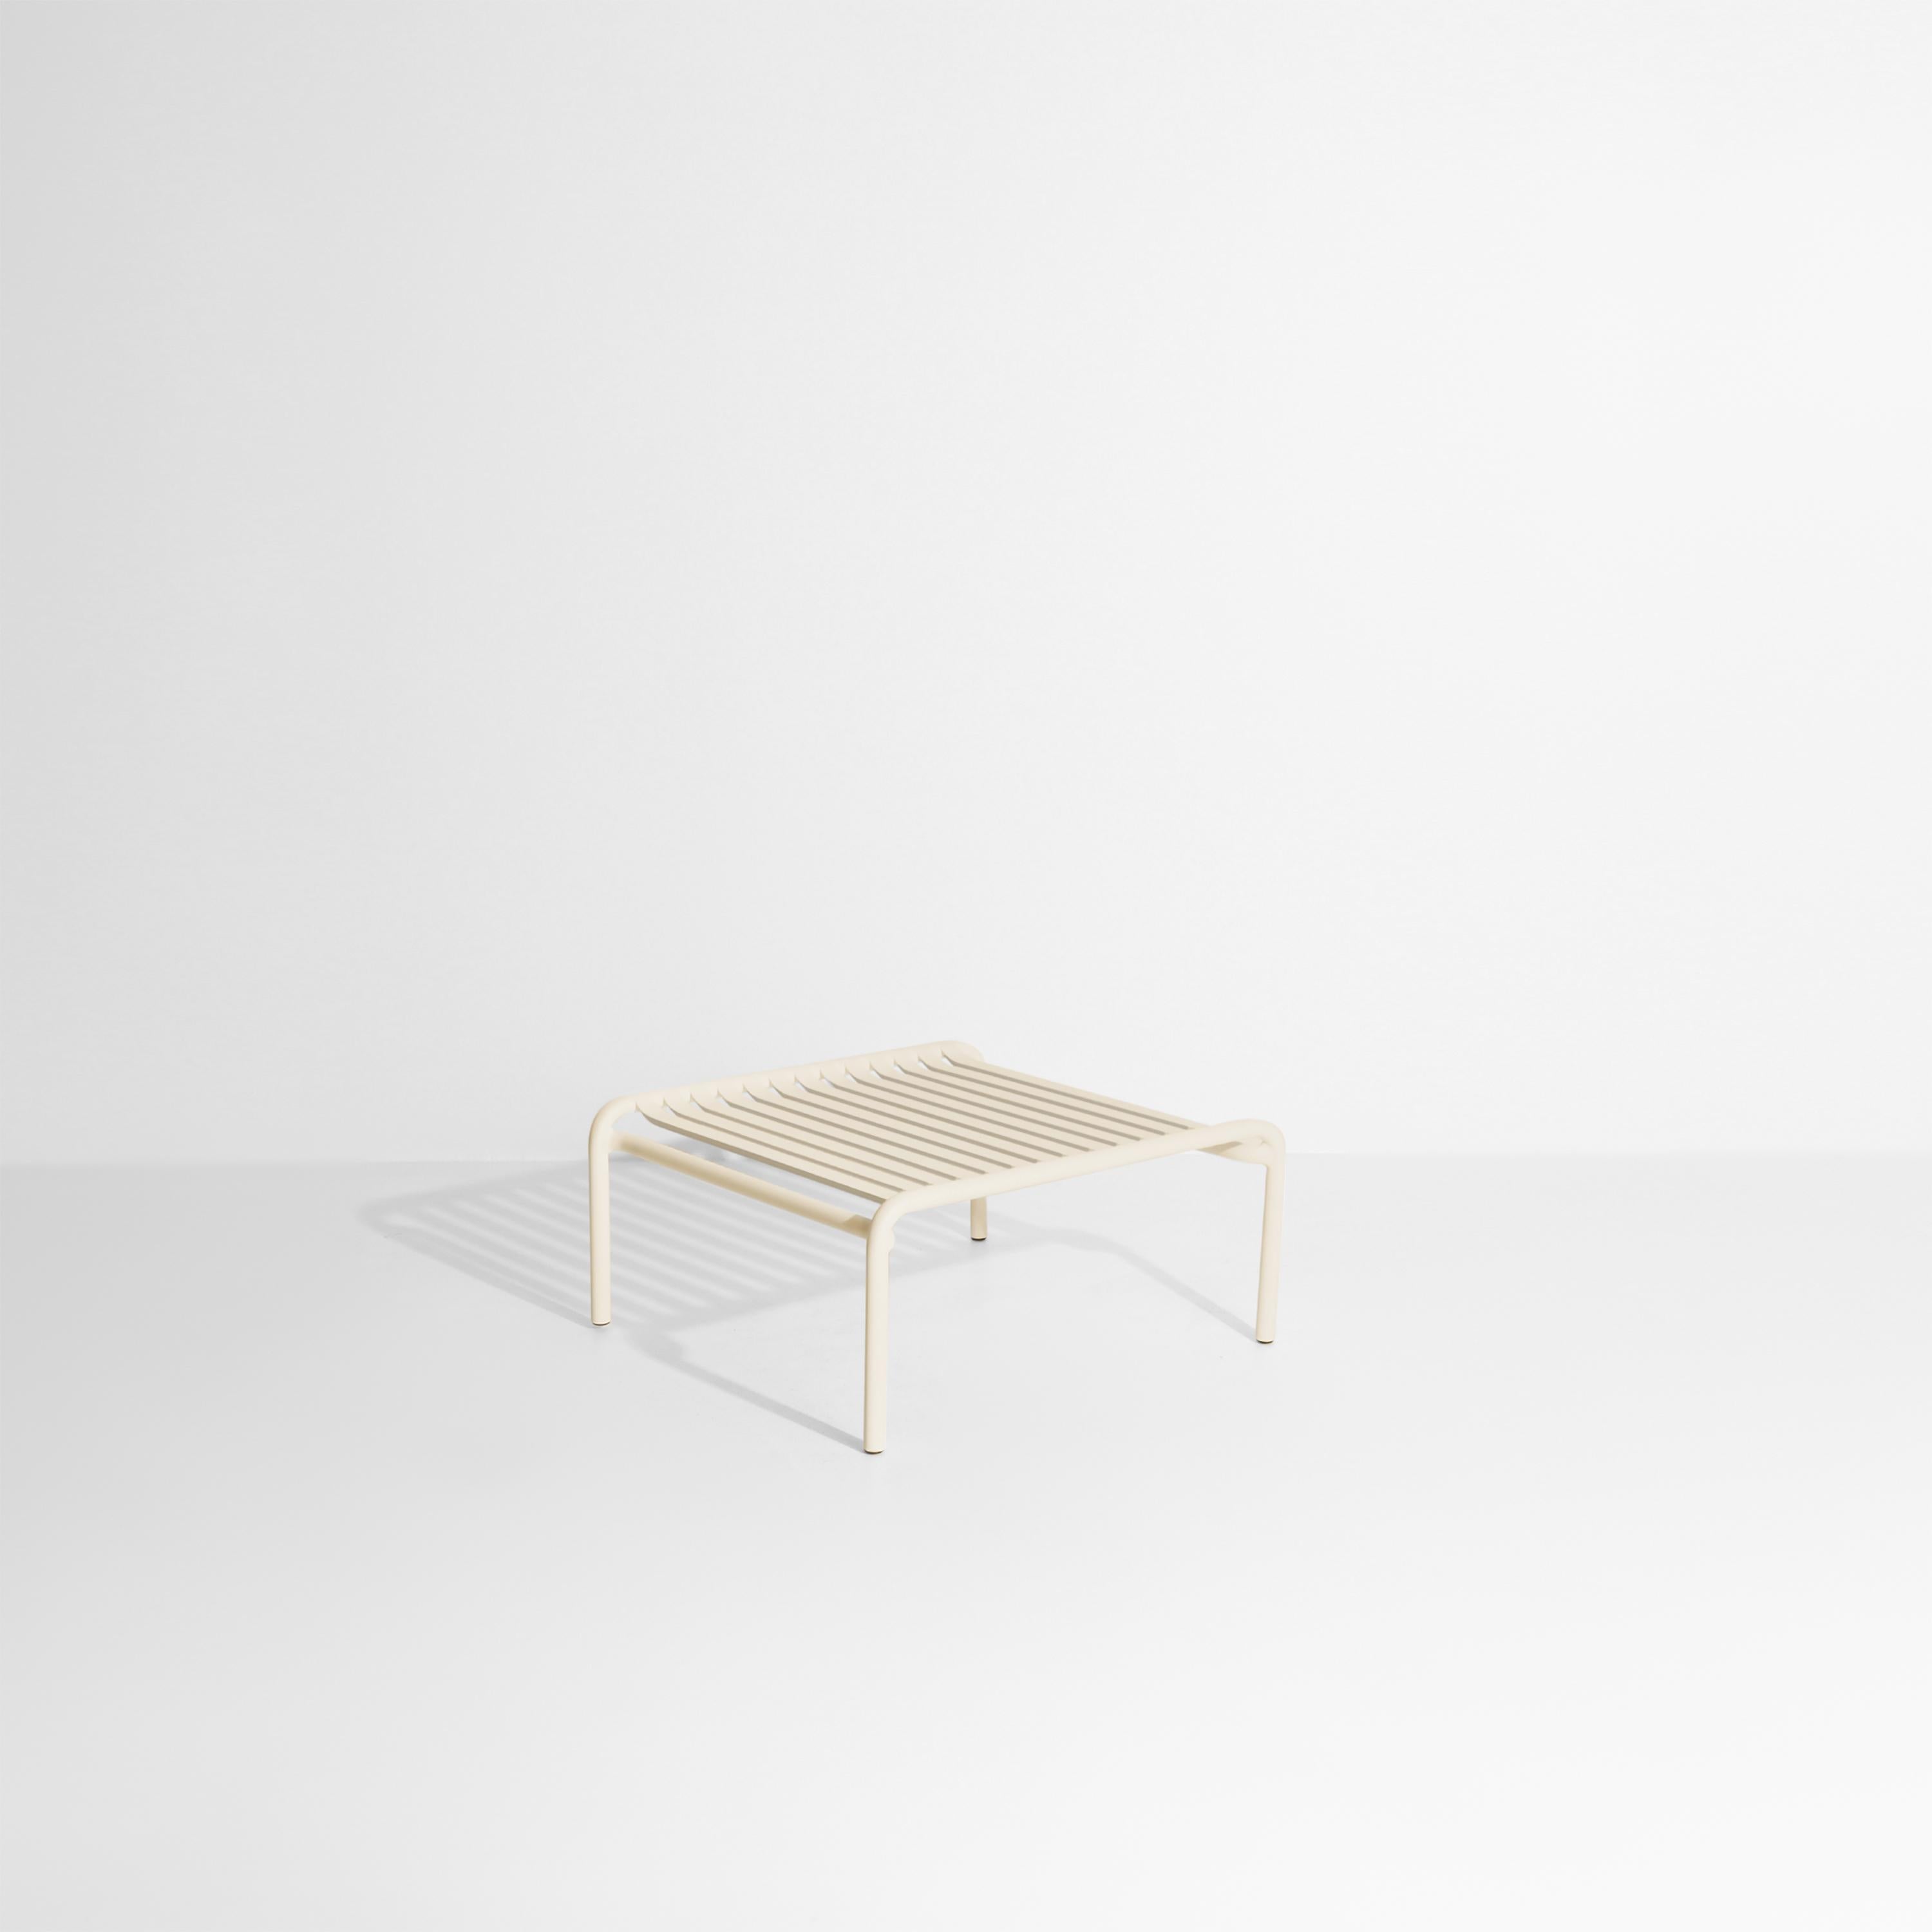 Petite Friture Week-End Coffee Table in Ivory Aluminium by Studio BrichetZiegler, 2017

The week-end collection is a full range of outdoor furniture, in aluminium grained epoxy paint, matt finish, that includes 18 functions and 8 colours for the